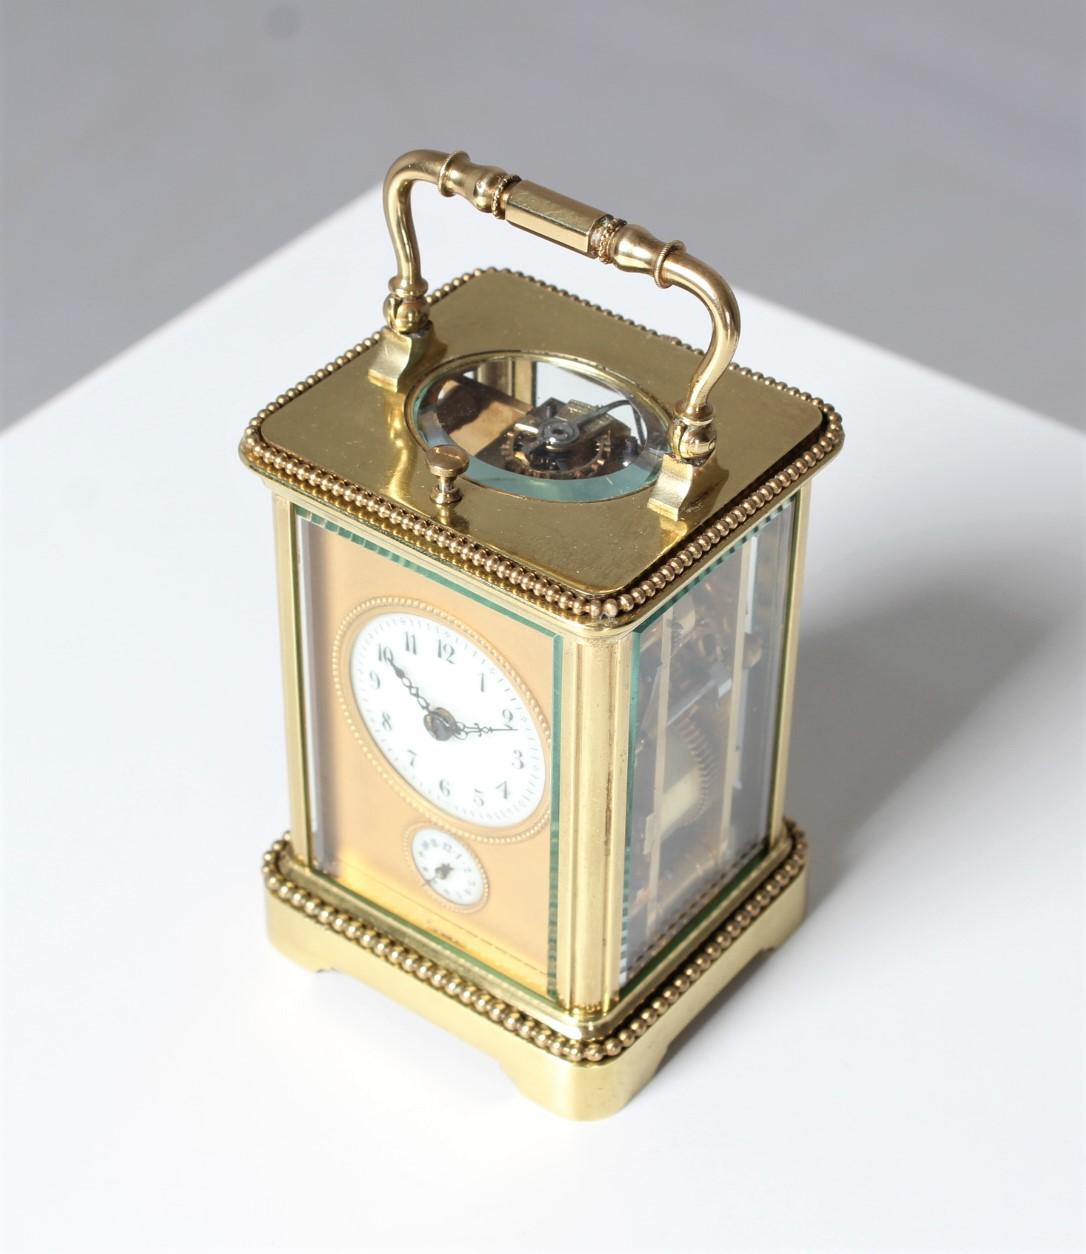 Antique travel clock, Carriage, Pendulette de Voyage.

France
brass, glass
around 1900

Dimensions: H x W x D: 10 x 7 x 6 cm

Description:
Beautiful small travel alarm clock in brass case.
Half hour and hour strike on sound spiral. Hour